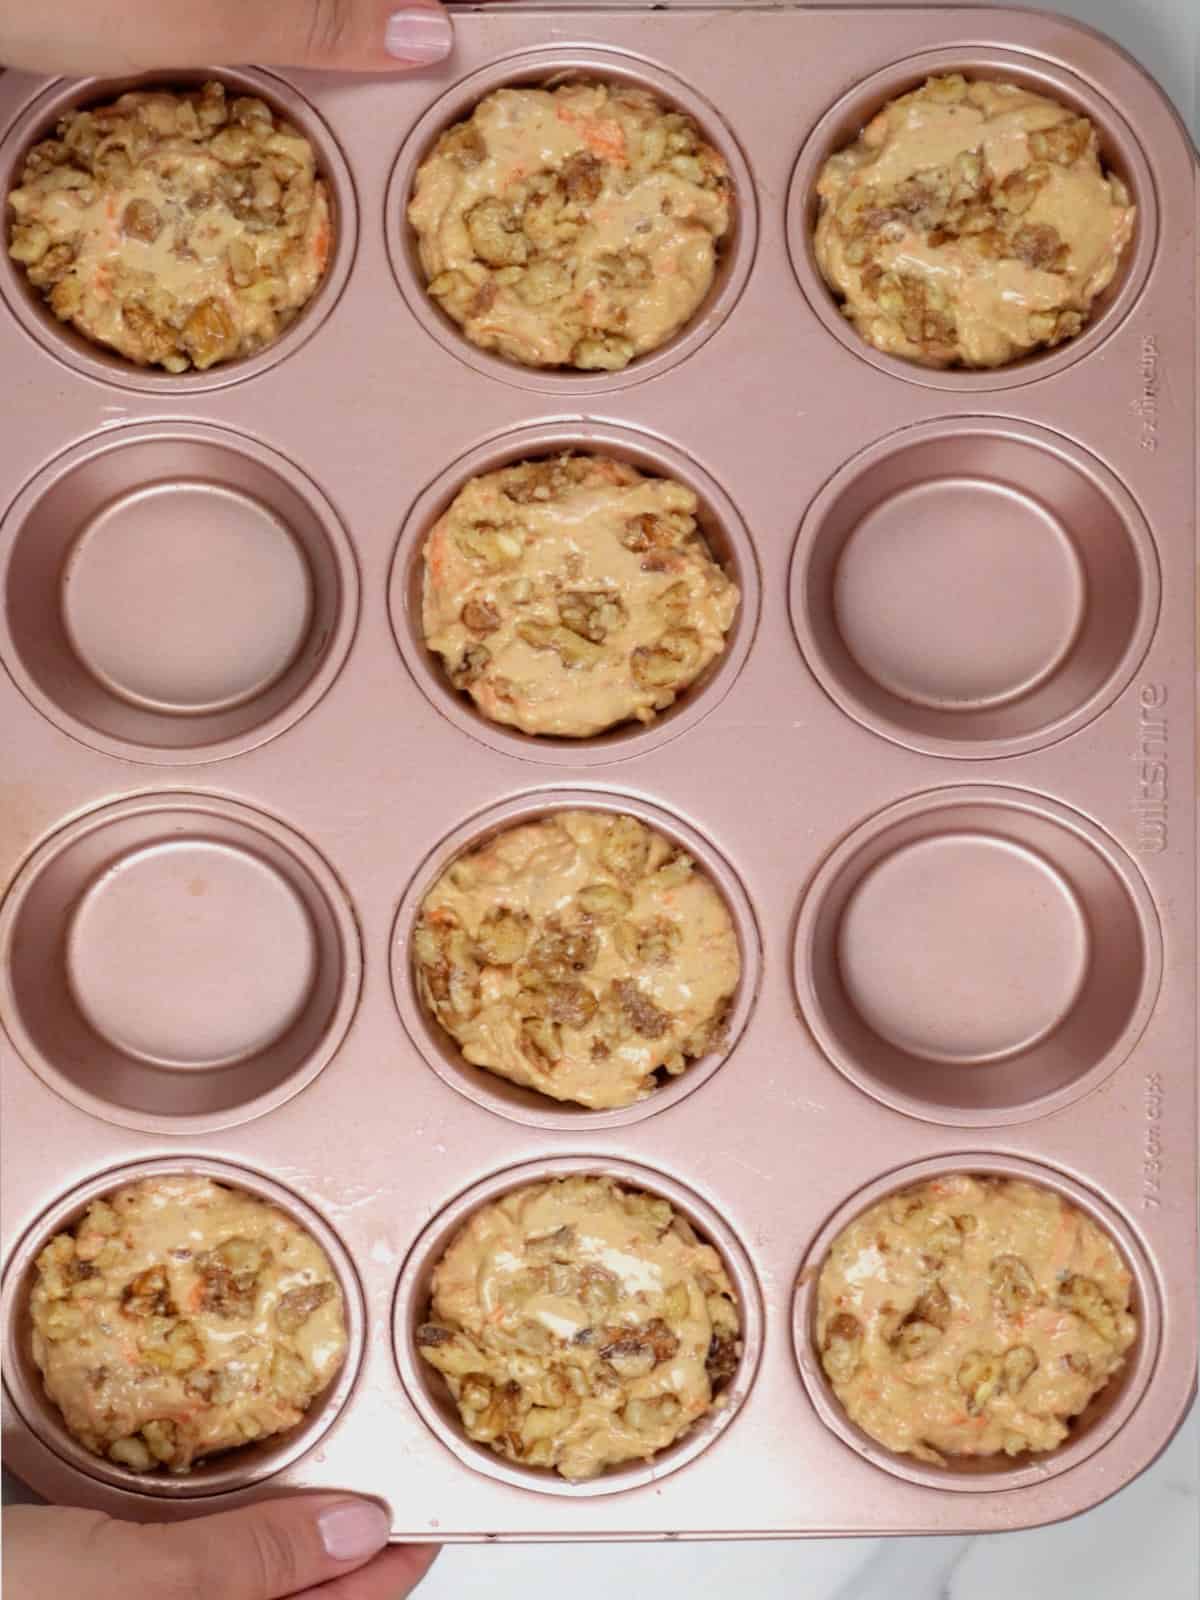 unbaked batter in 8 cups of a pink muffin tray